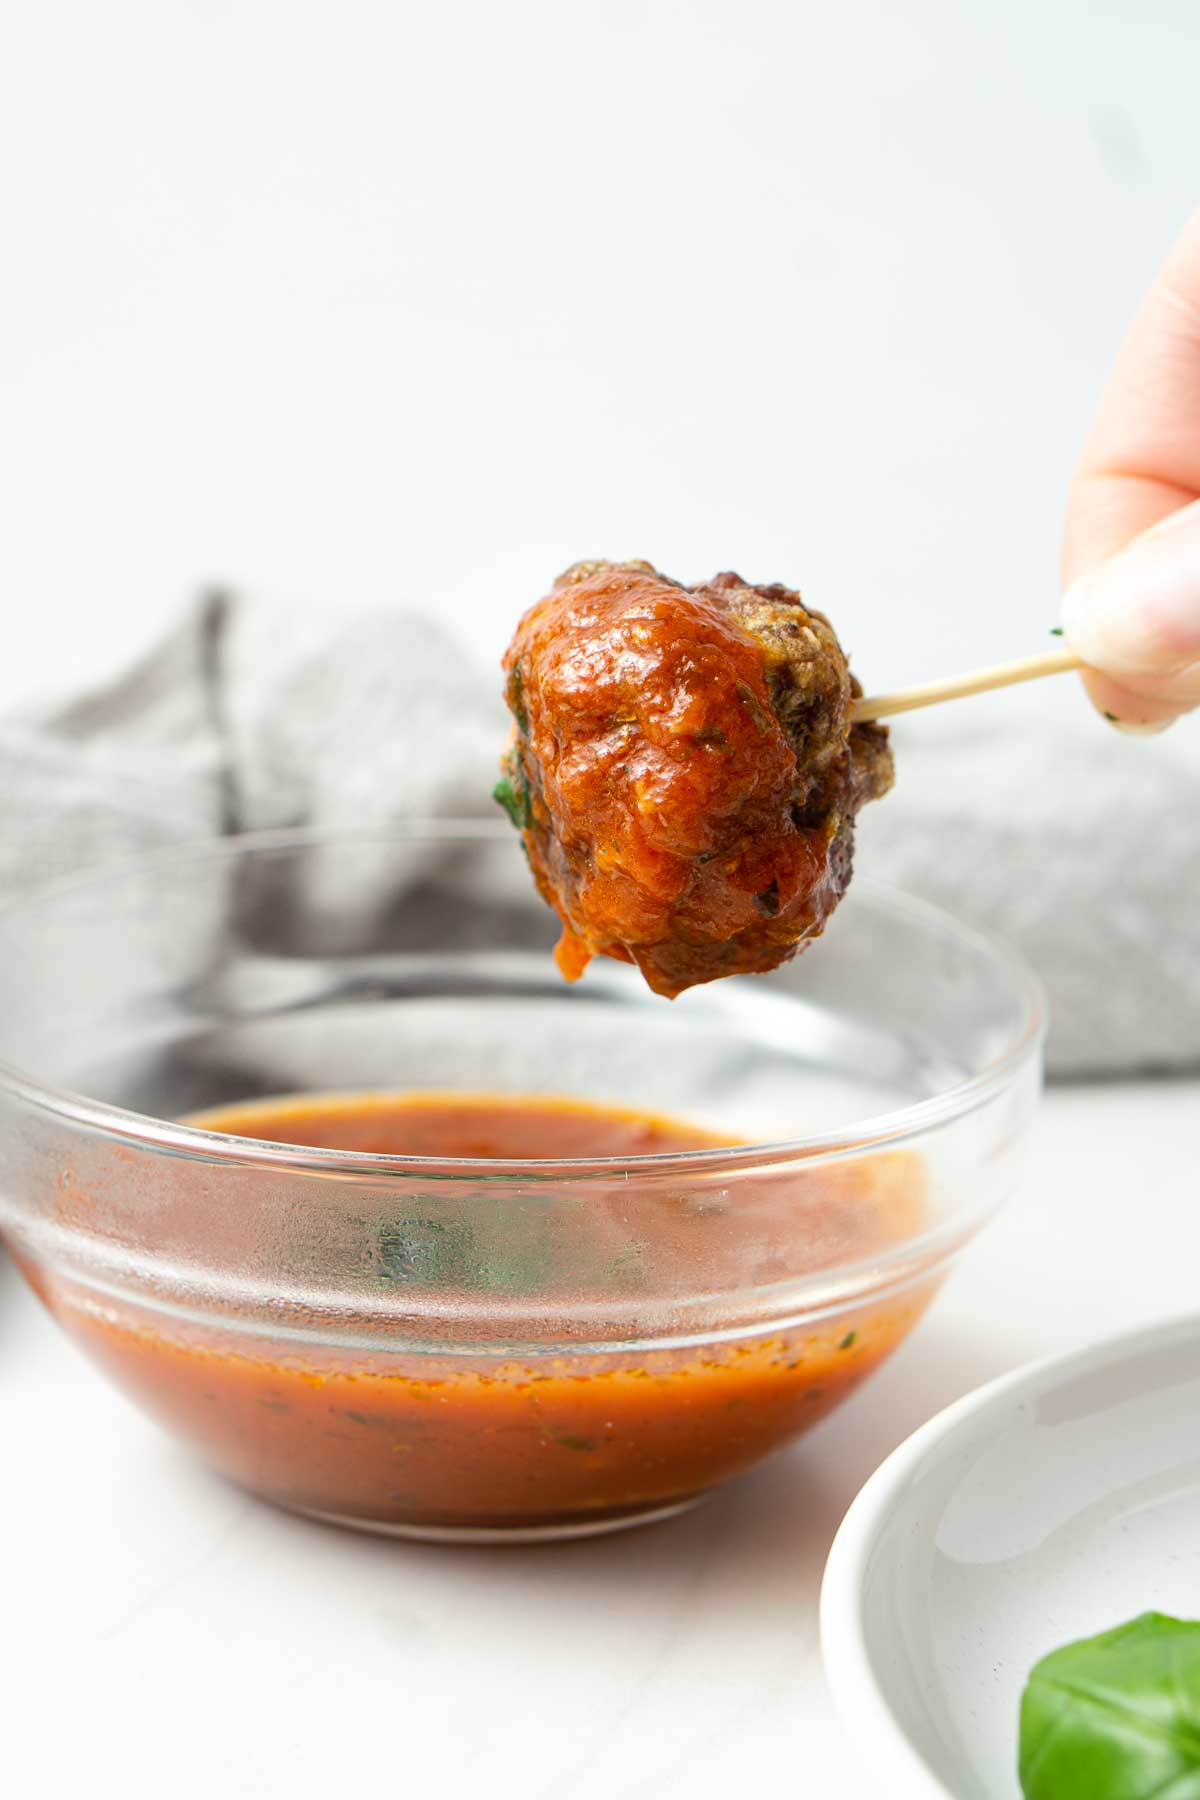 Meatball being dunked into tomato sauce